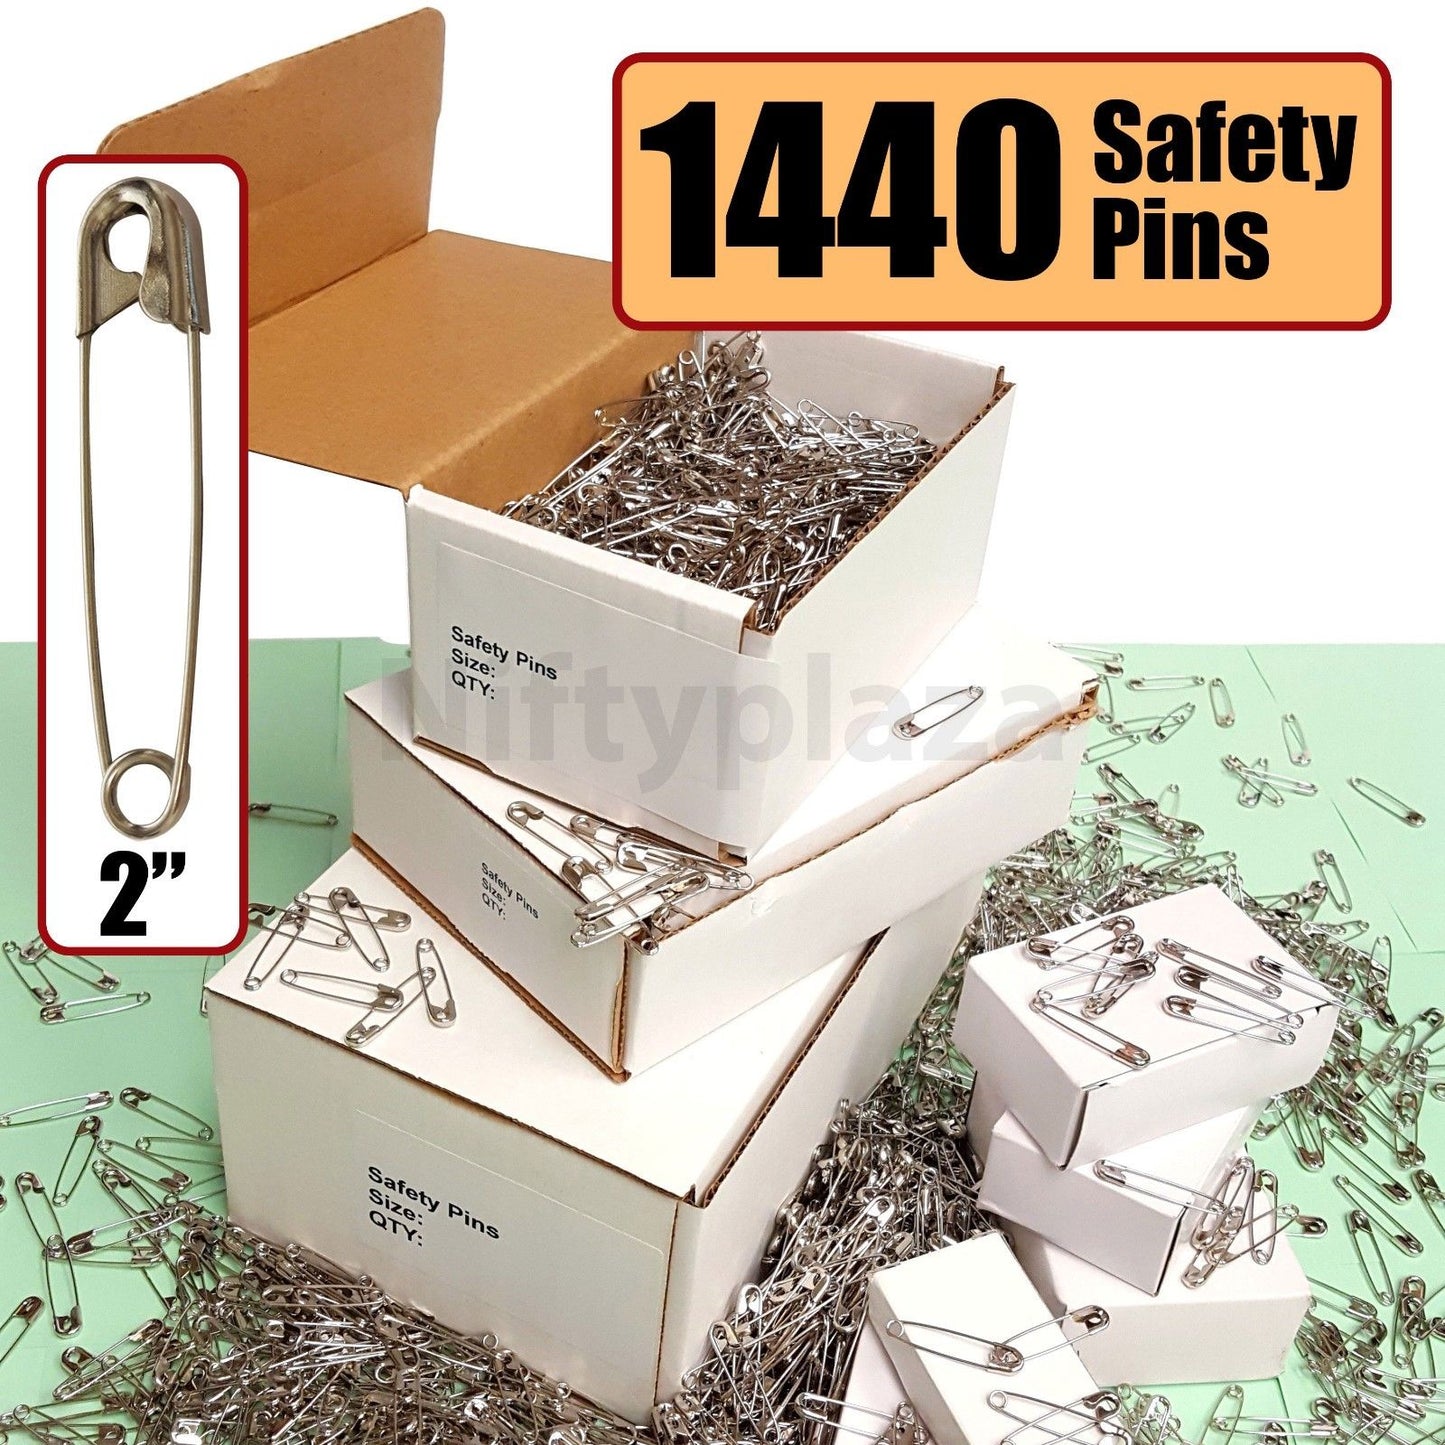 NiftyPlaza 1440 Extra Large Safety Pins, Size 2", High-Grade Steel, Nickel Plated, Rust Resistant, for Crafting